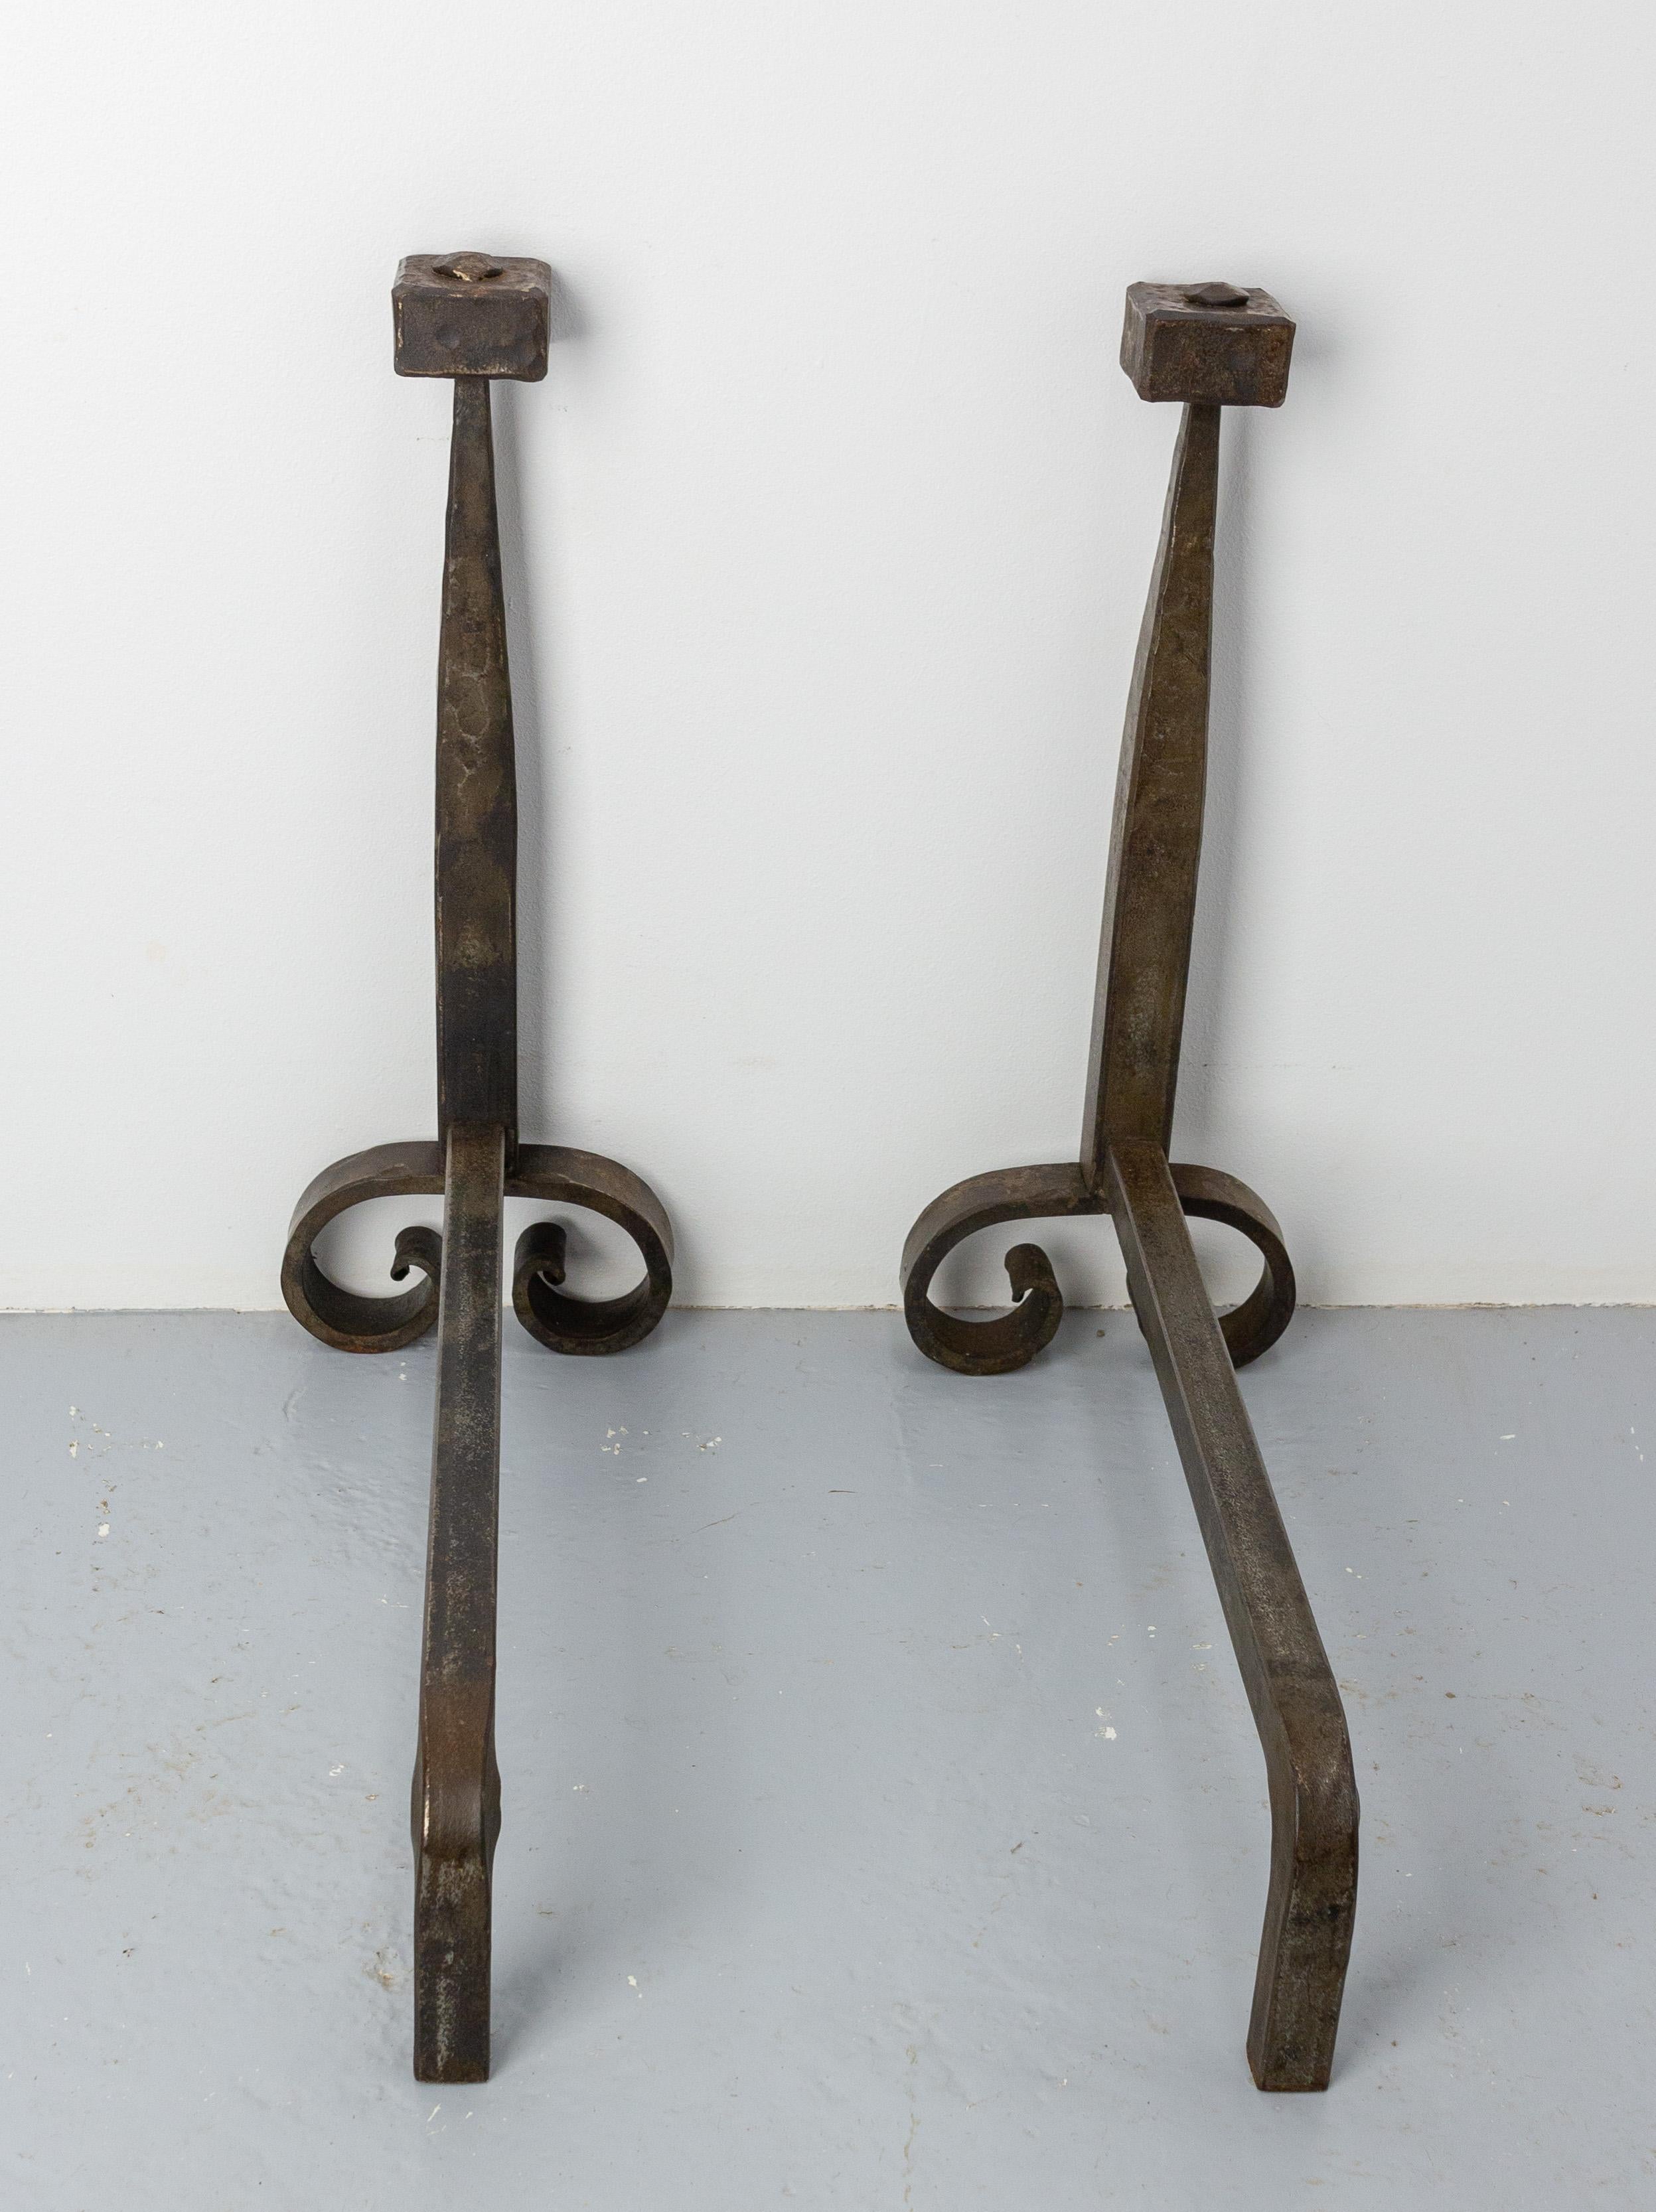 Pair of andirons of the périod Mid-century modern
Wrought iron firedogs
French circa 1960.
Good condition

Shipping:
52 / 30.5 / 50 cm 14 kg
    